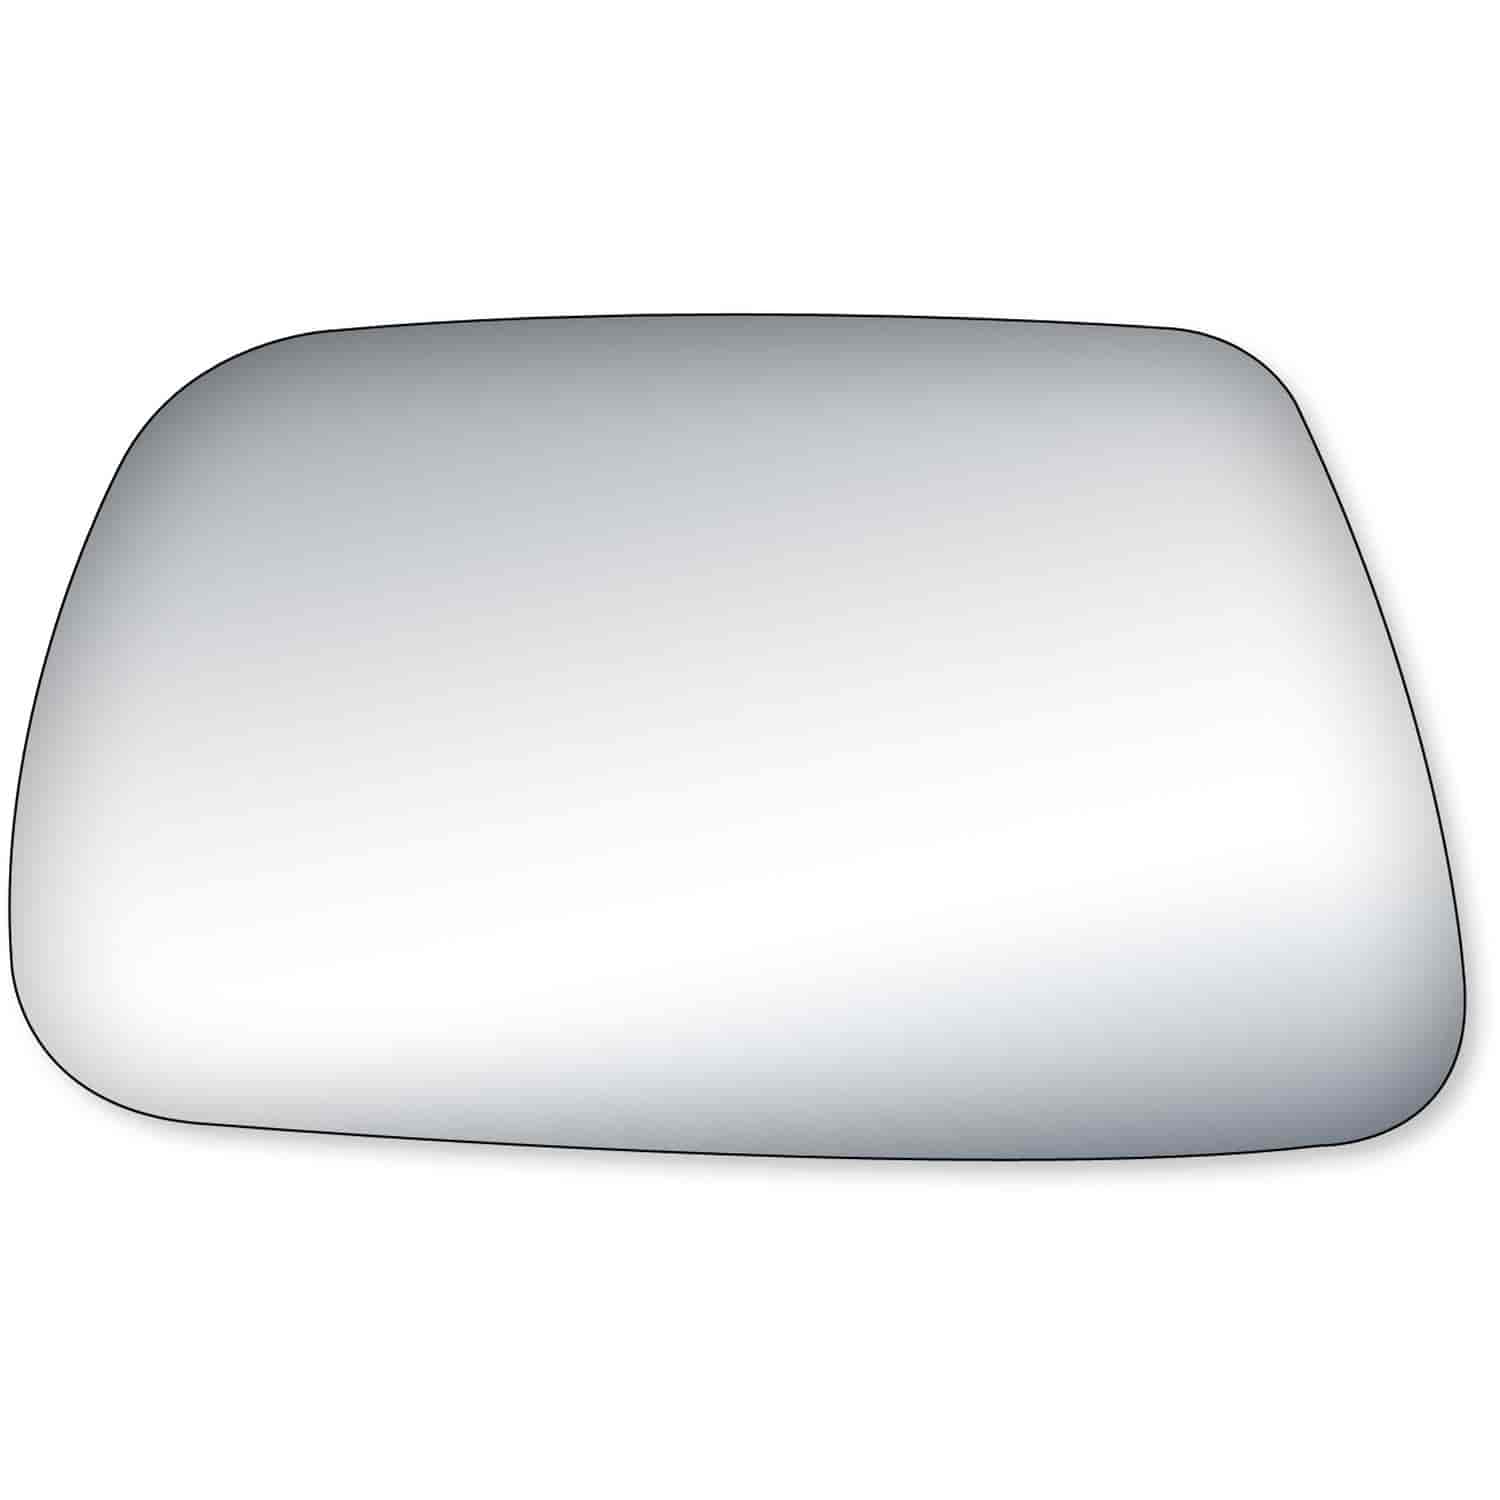 Replacement Glass for 05-10 Grand Cherokee w/out auto dimming the glass measures 4 7/8 tall by 8 1/4